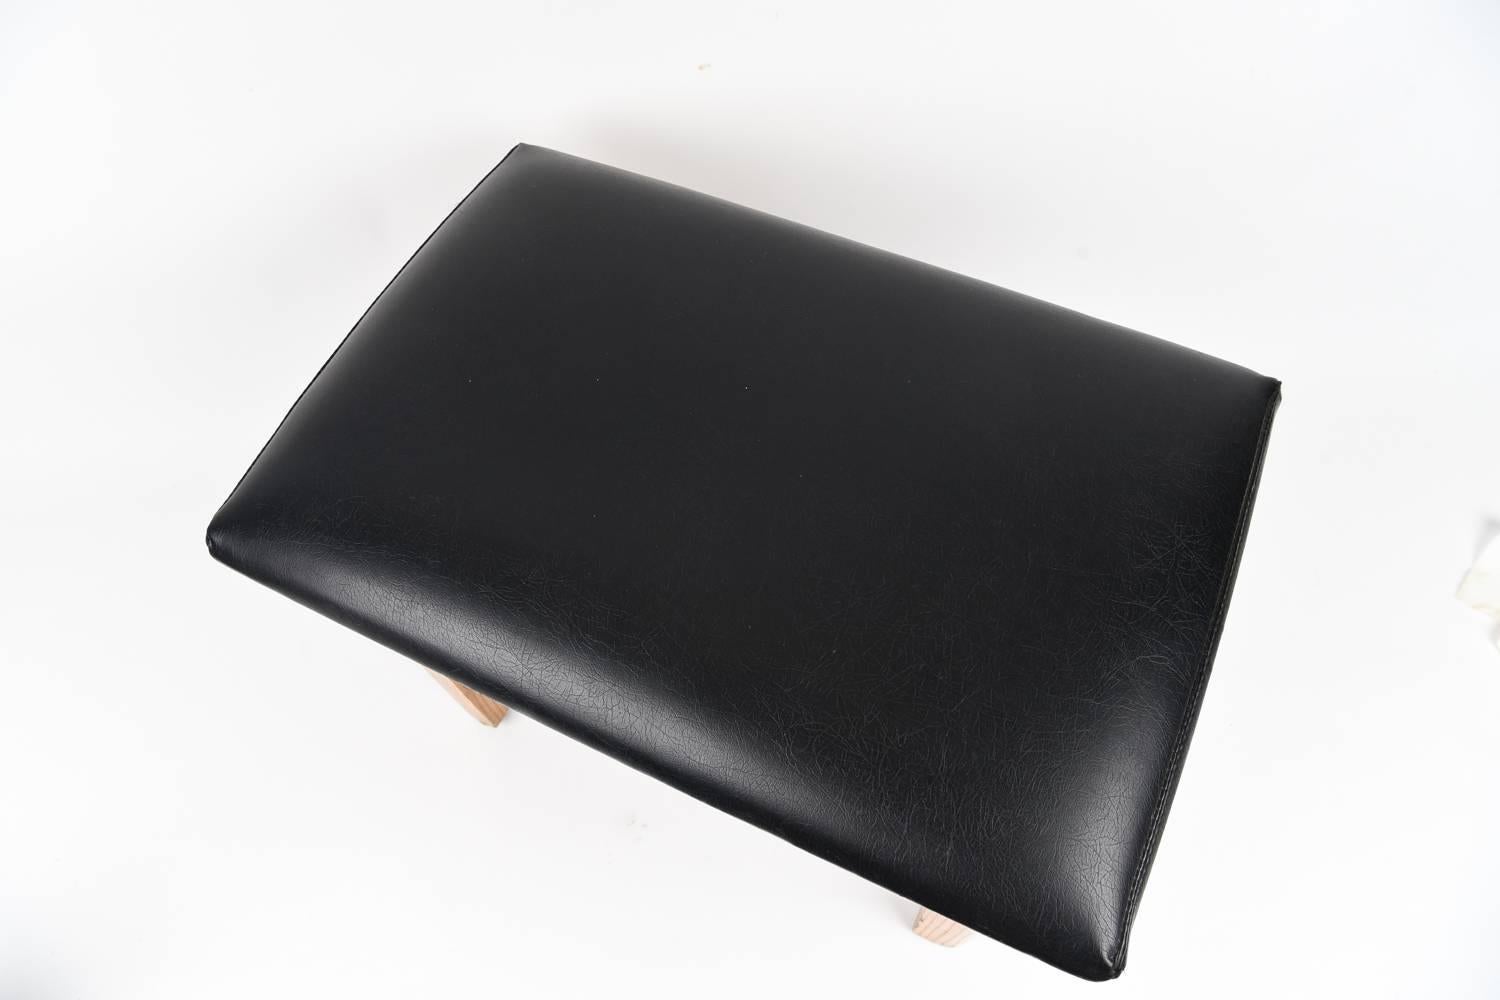 A beautiful stool or ottoman with black leather upholstery.